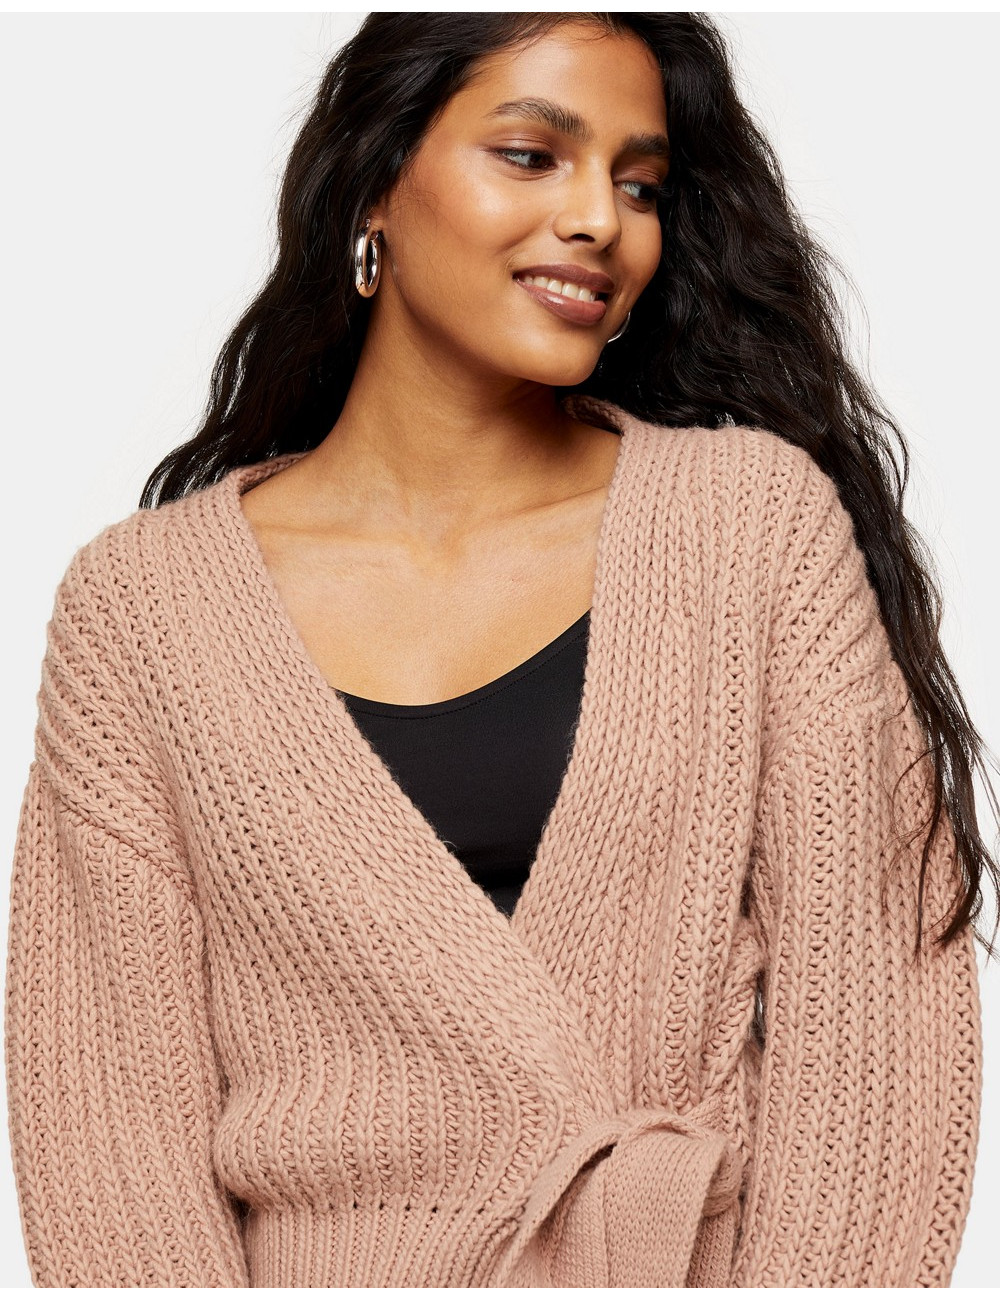 Topshop knitted tie wrap cardi